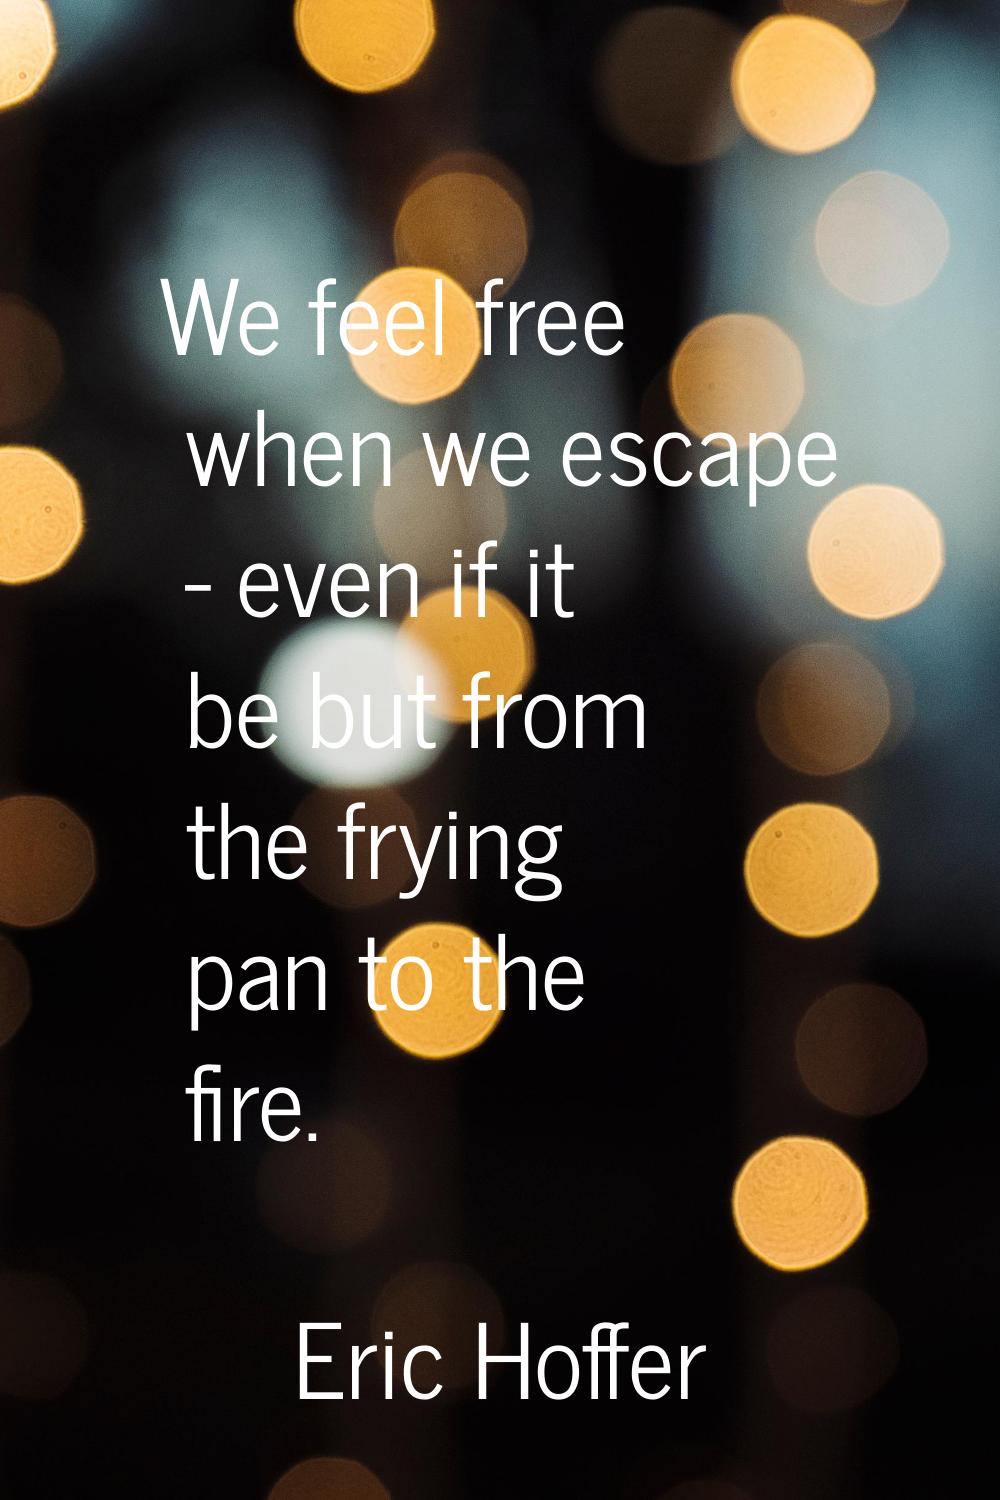 We feel free when we escape - even if it be but from the frying pan to the fire.